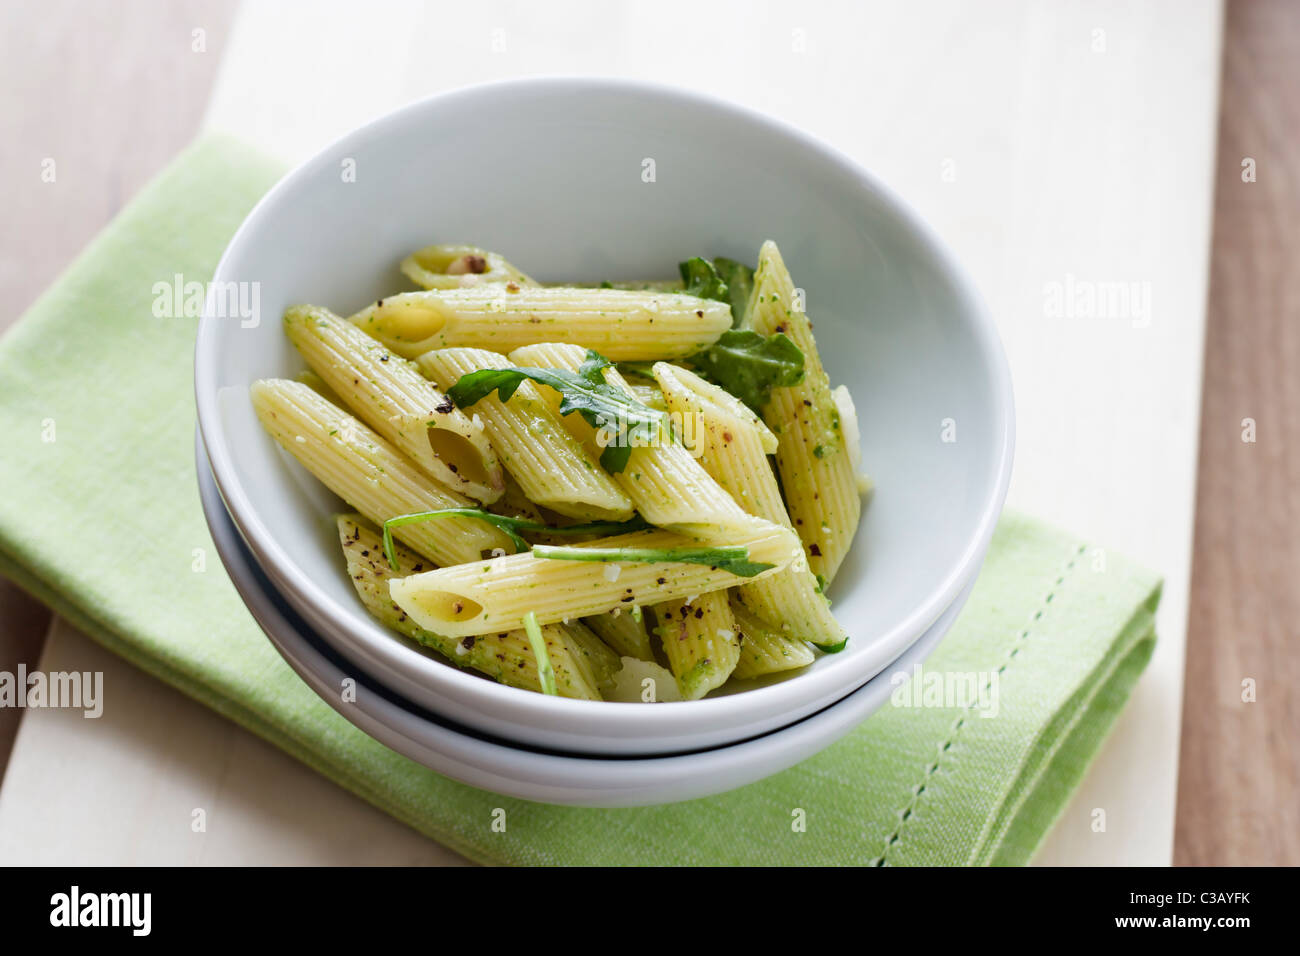 Rigatoni with home made rocket pesto, served in a white bowl on a green napkin. Stock Photo